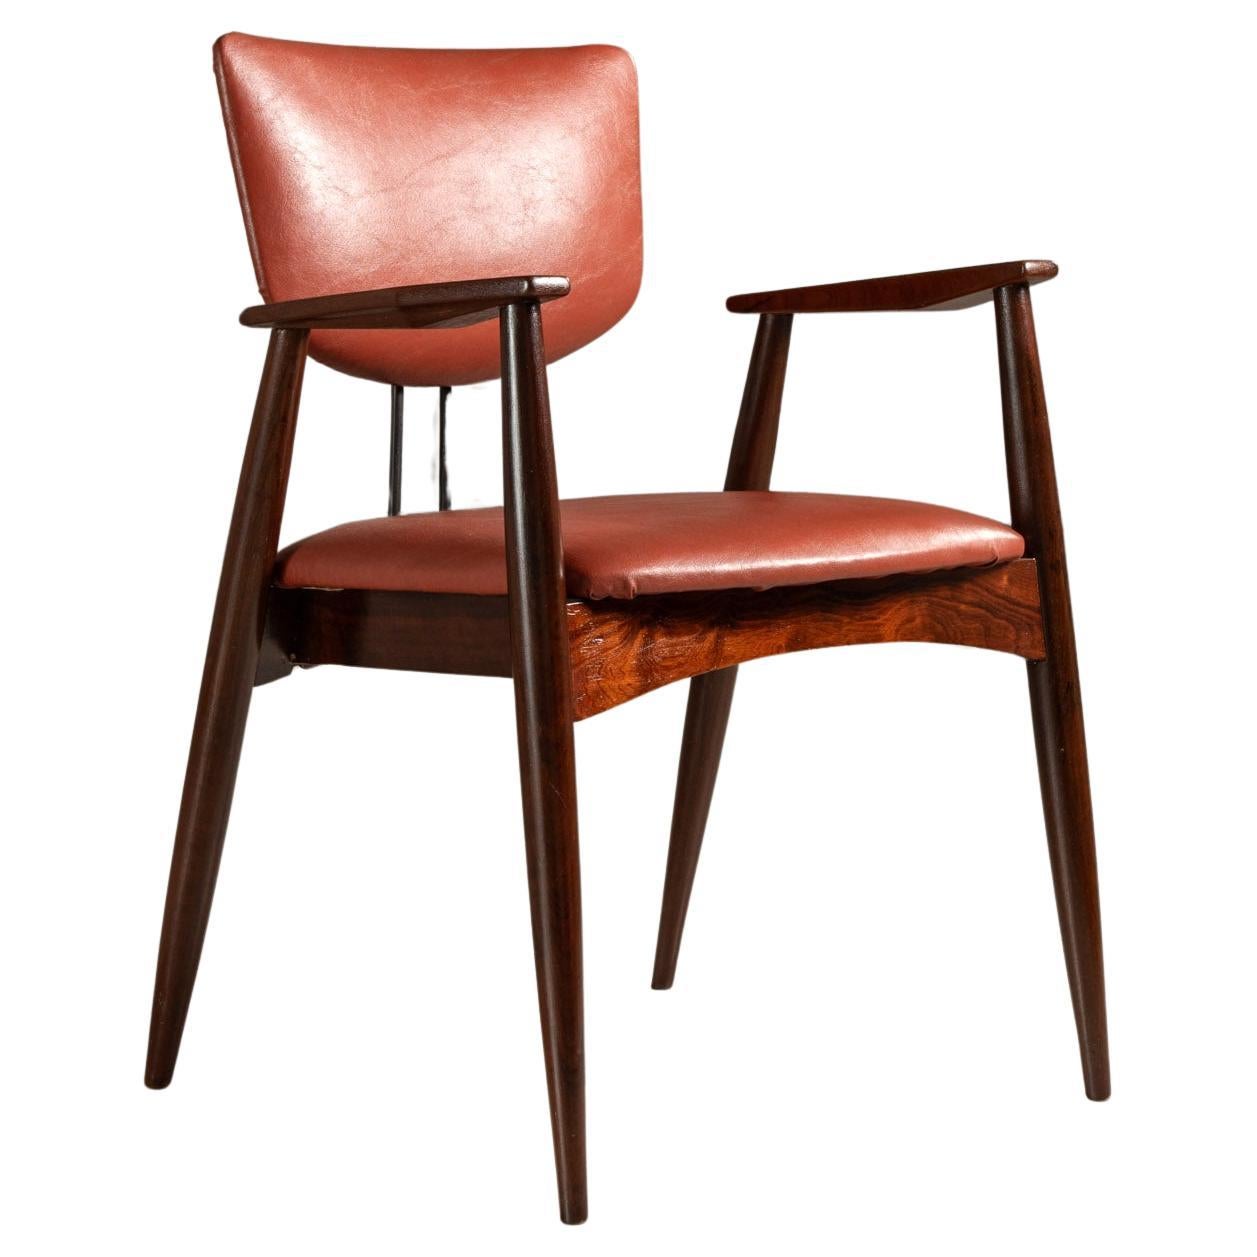 Chair in Wood, Iron and Leather, by Michel Arnoult, Brazilian Mid-Century Modern For Sale